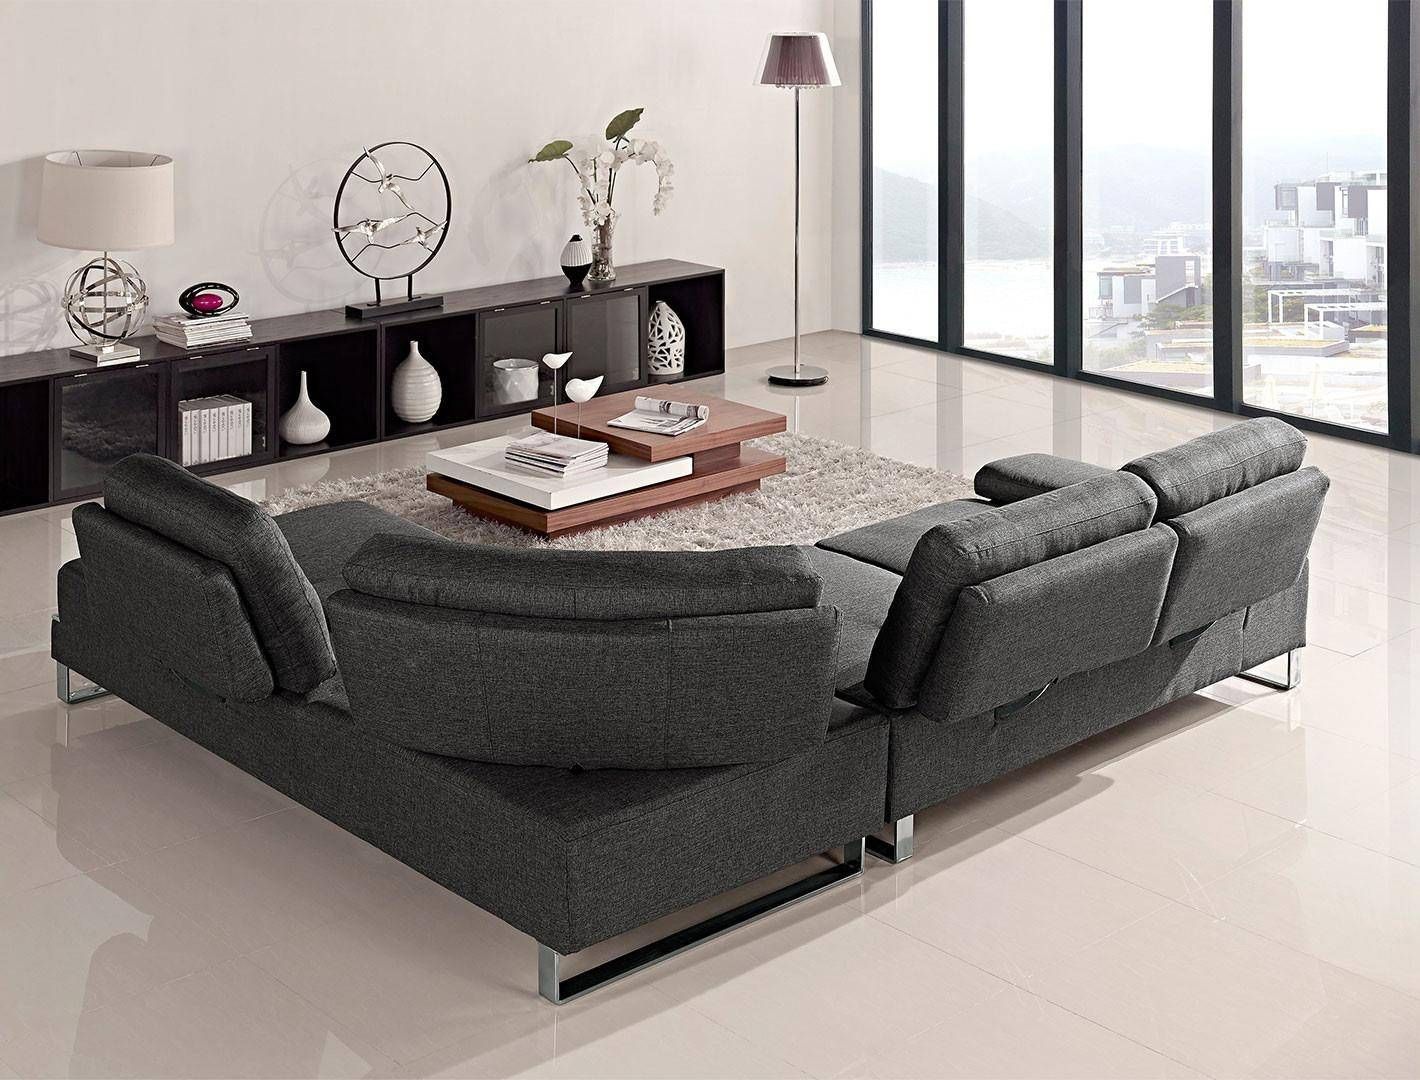 At Home Usa Verona Grey Fabric Ultra Modern Sectional Sofa With Regard To Sectional Sofas In Gray (View 14 of 15)